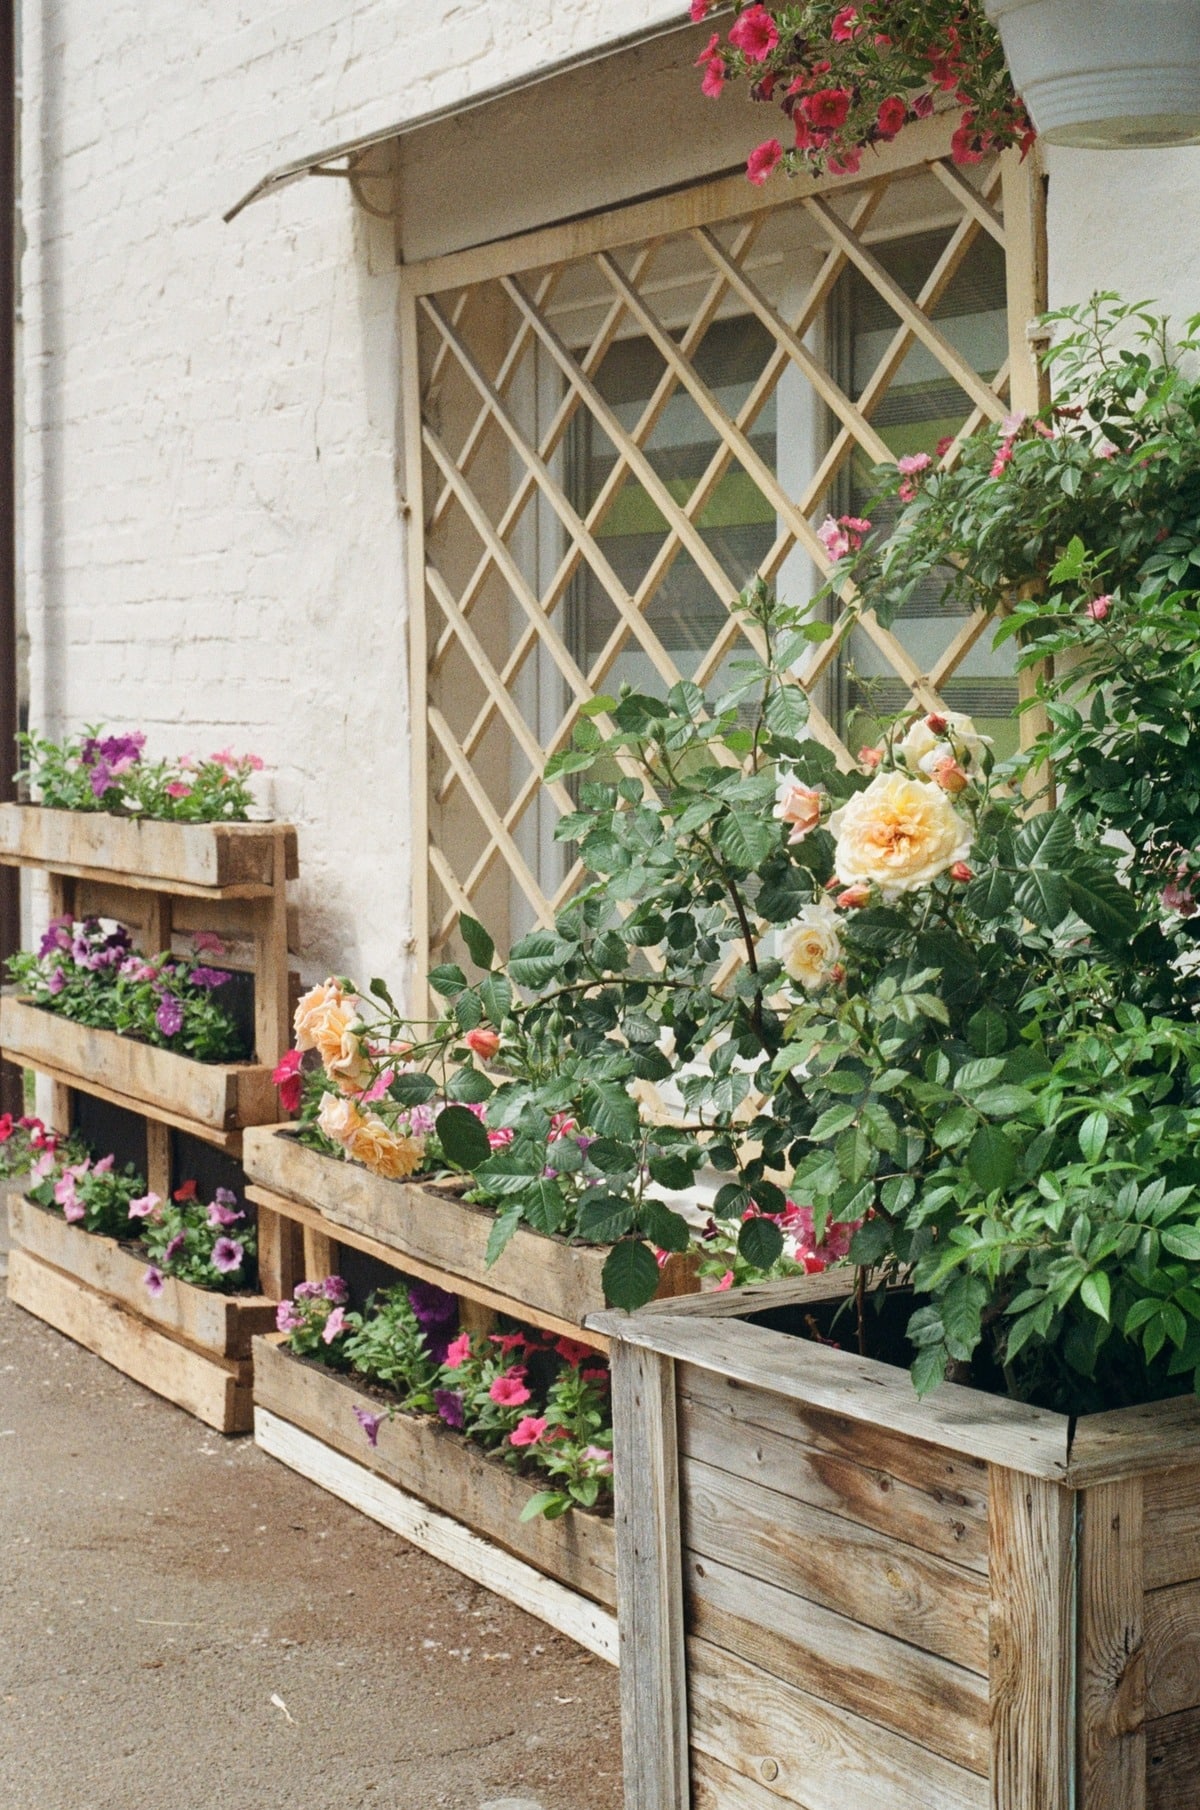 Plants in wooden planters